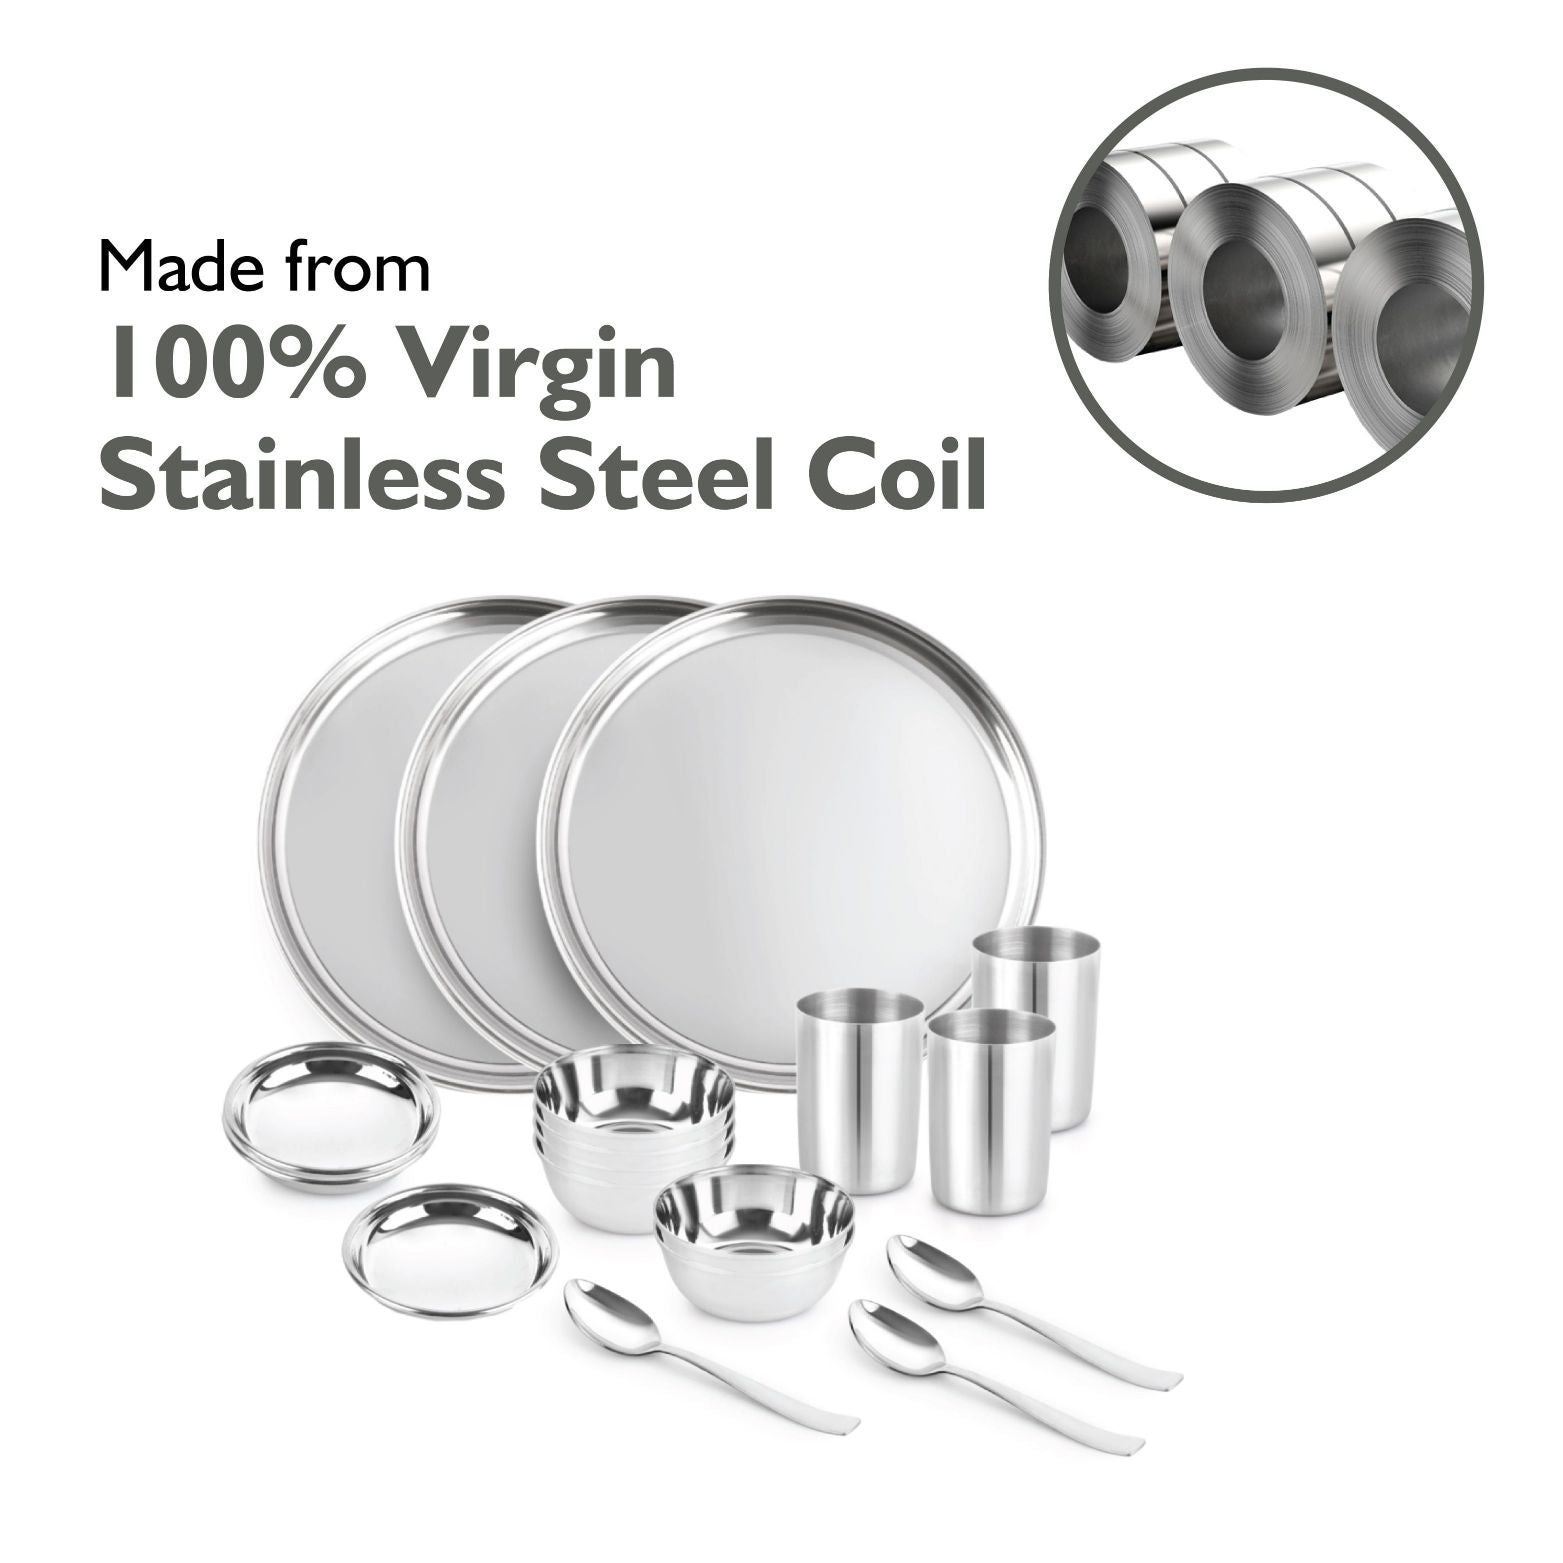 A durable 18-piece stainless steel dinner set for a family of 3